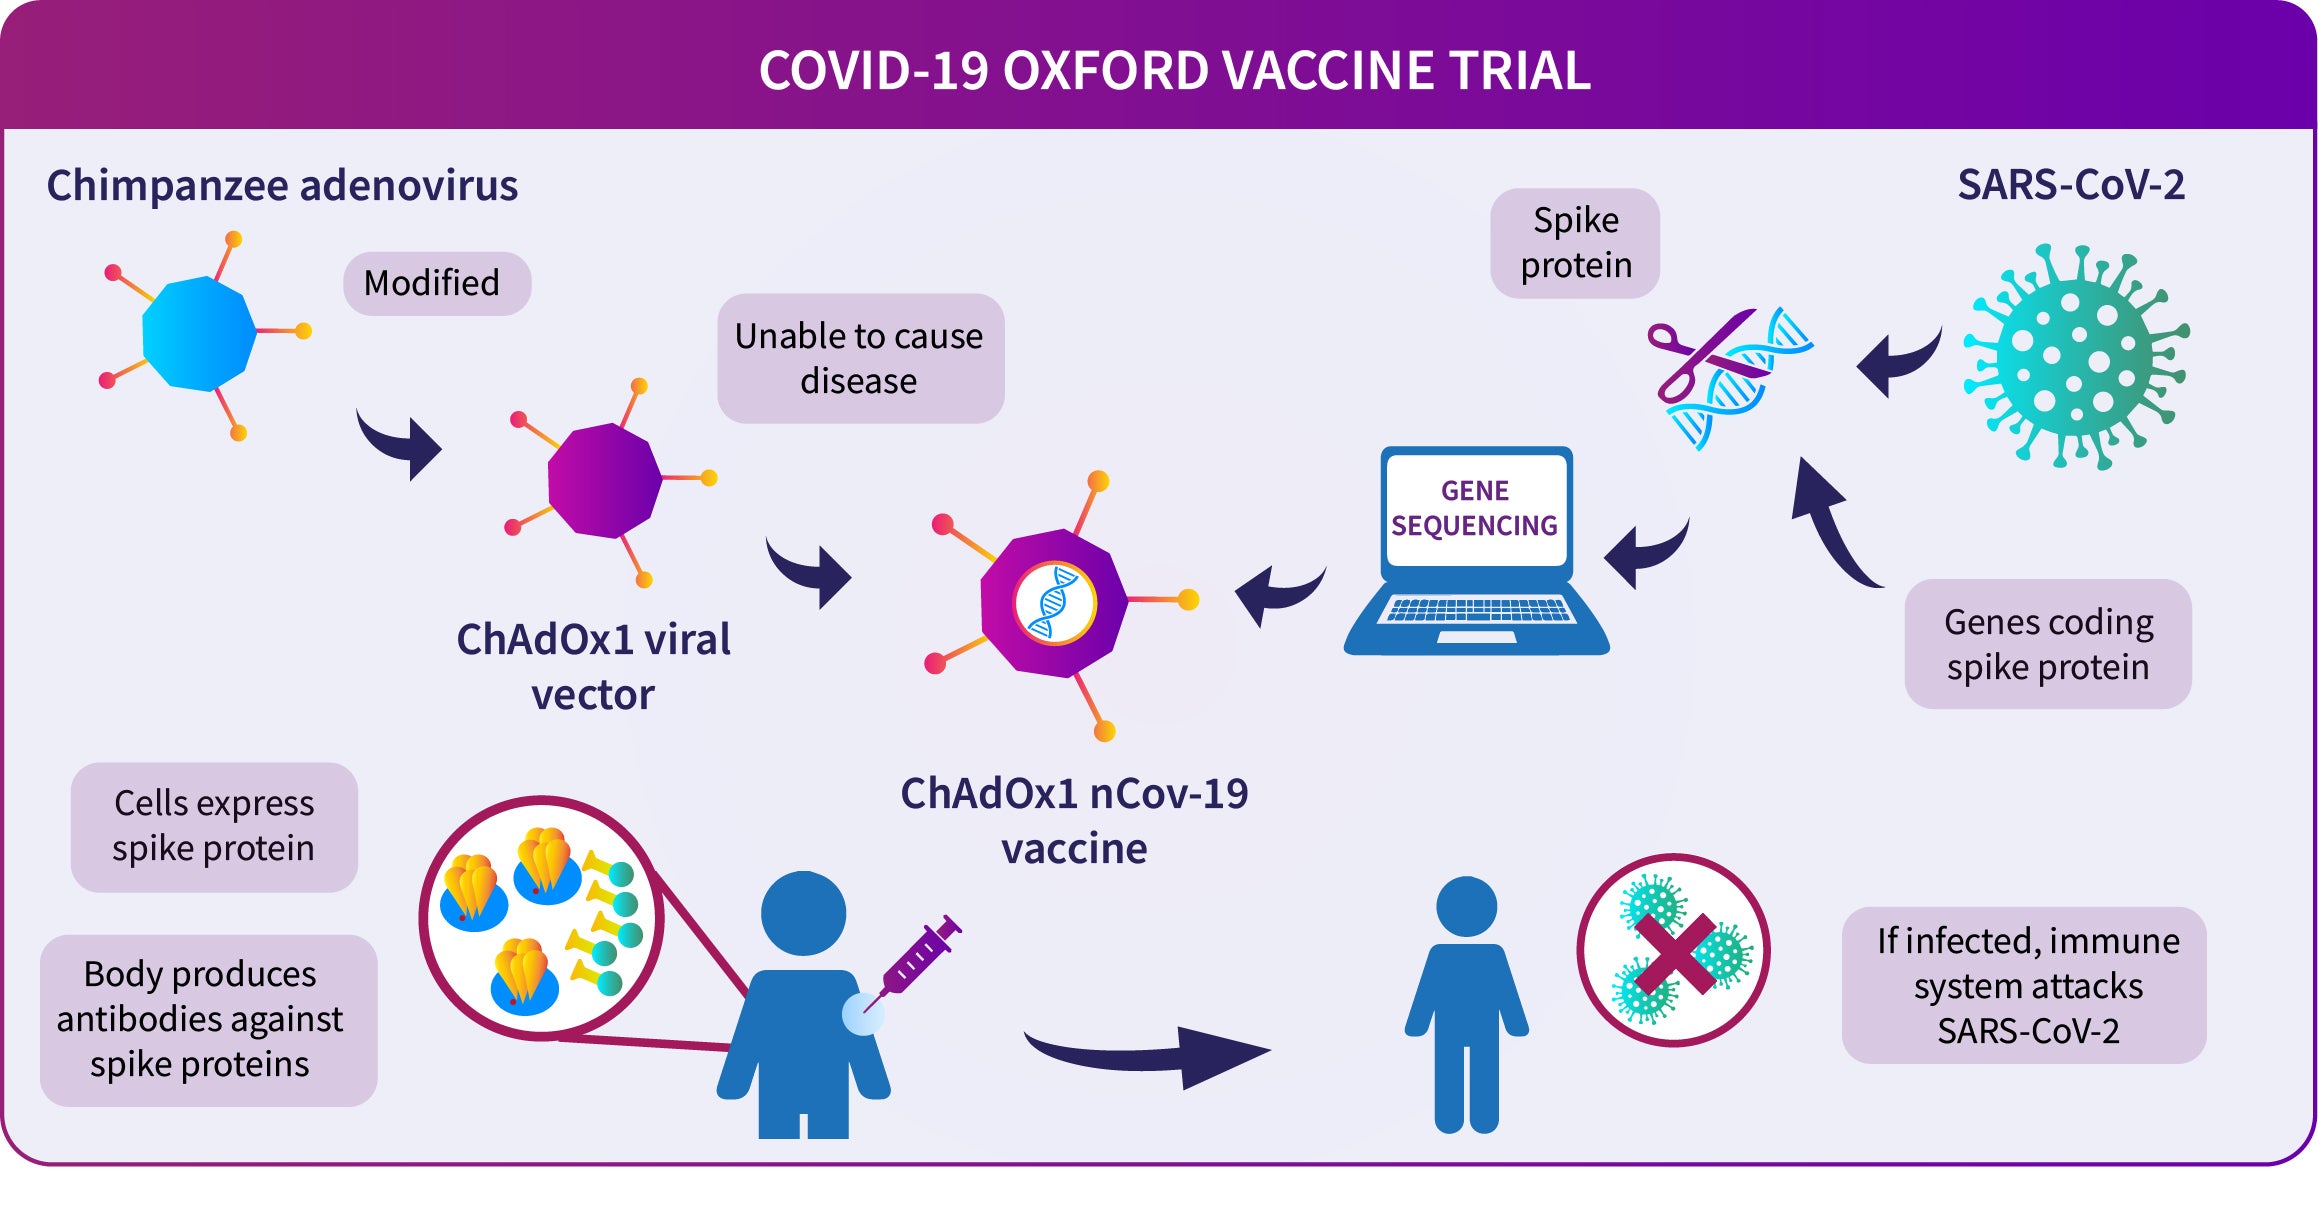 A diagram showing how the Oxford COVID-19 vaccine works. A chimpanzee adenovirus is used in the ChAdOx1 viral vector, engineered to match the SARS-CoV-2 spike protein.